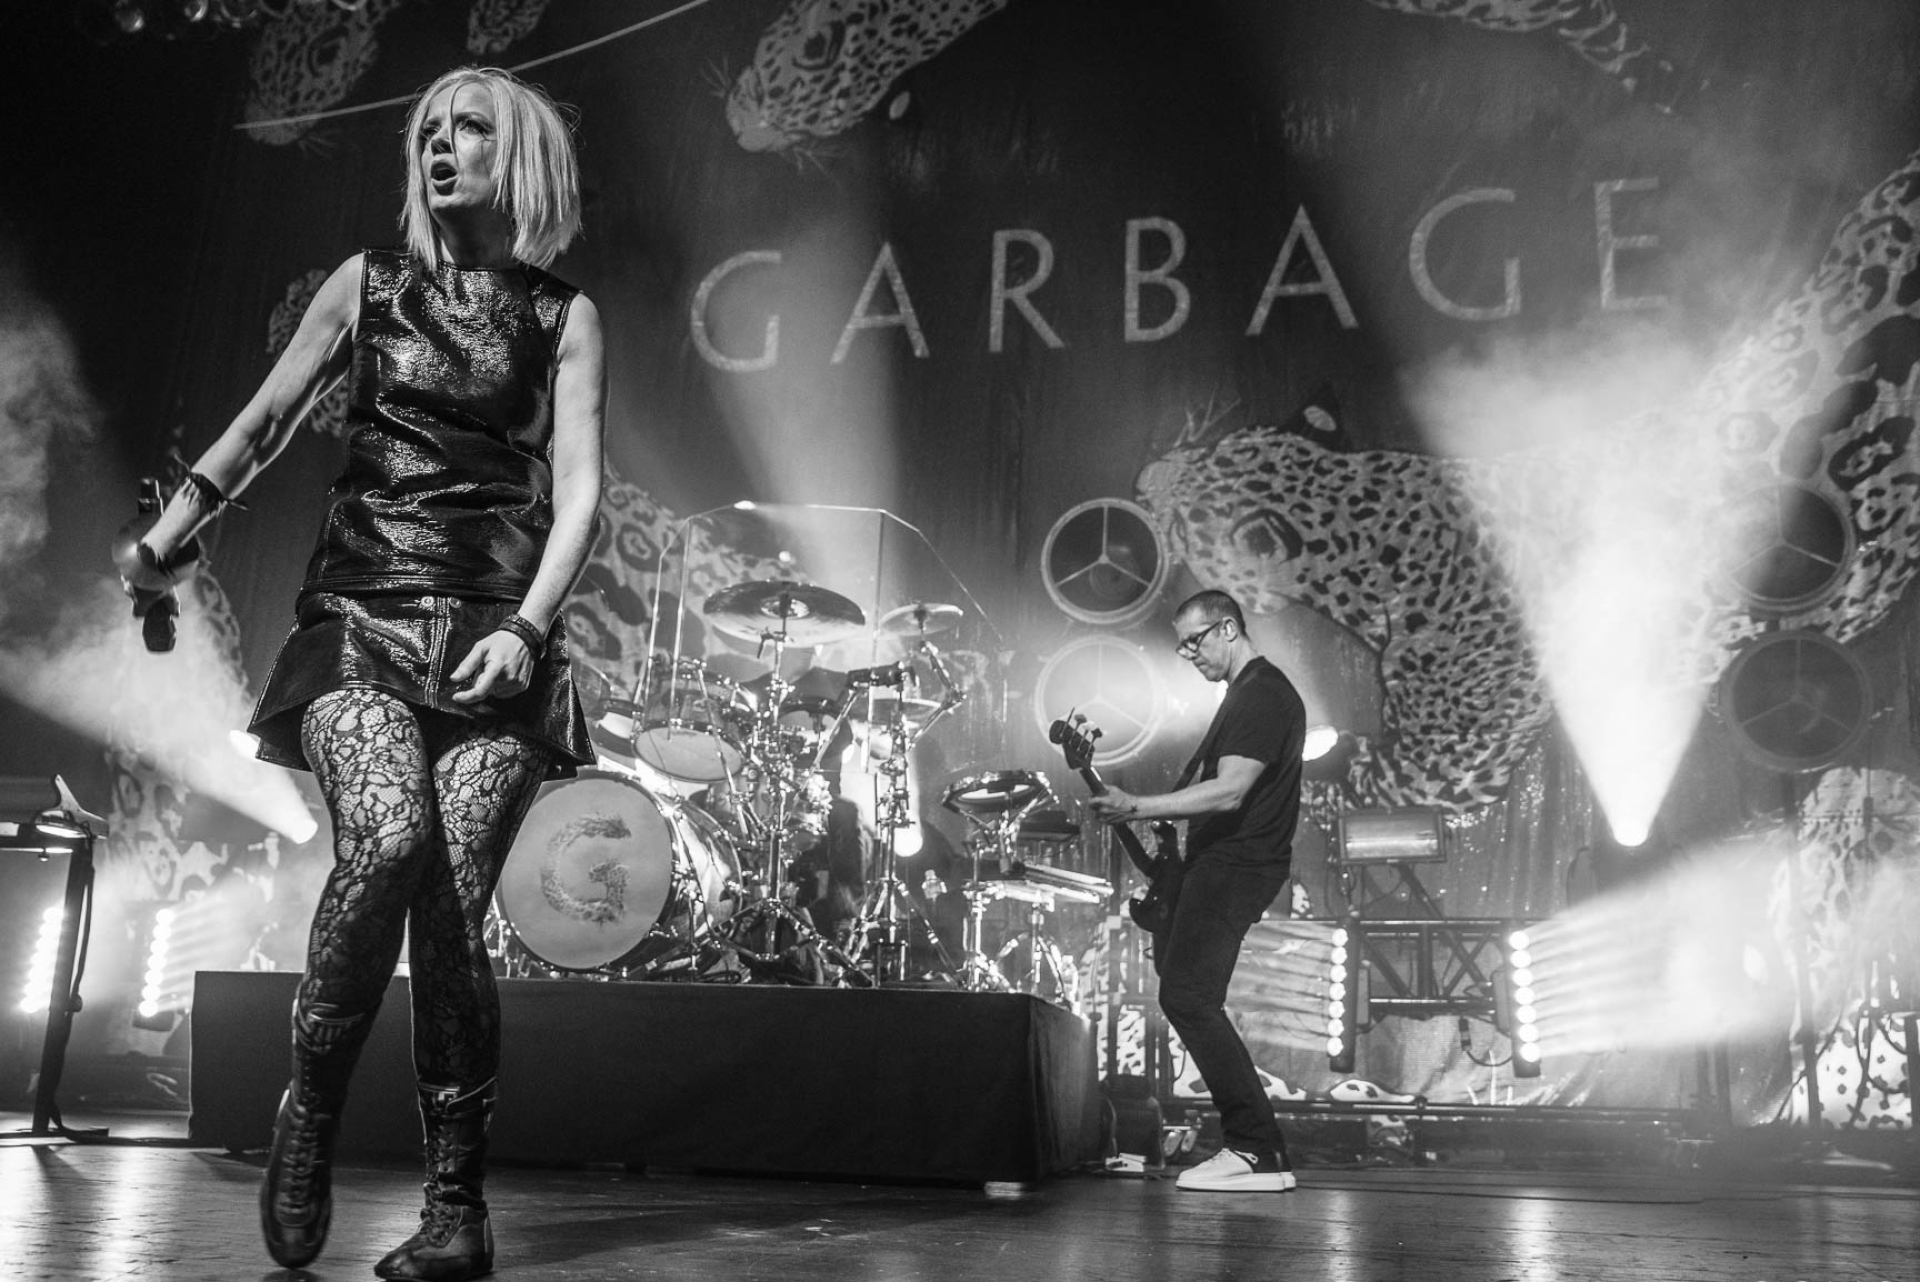 Garbage at Egyptian Room, Live concert photos, Indy 2016 Concert, Art of live performance, 1920x1290 HD Desktop